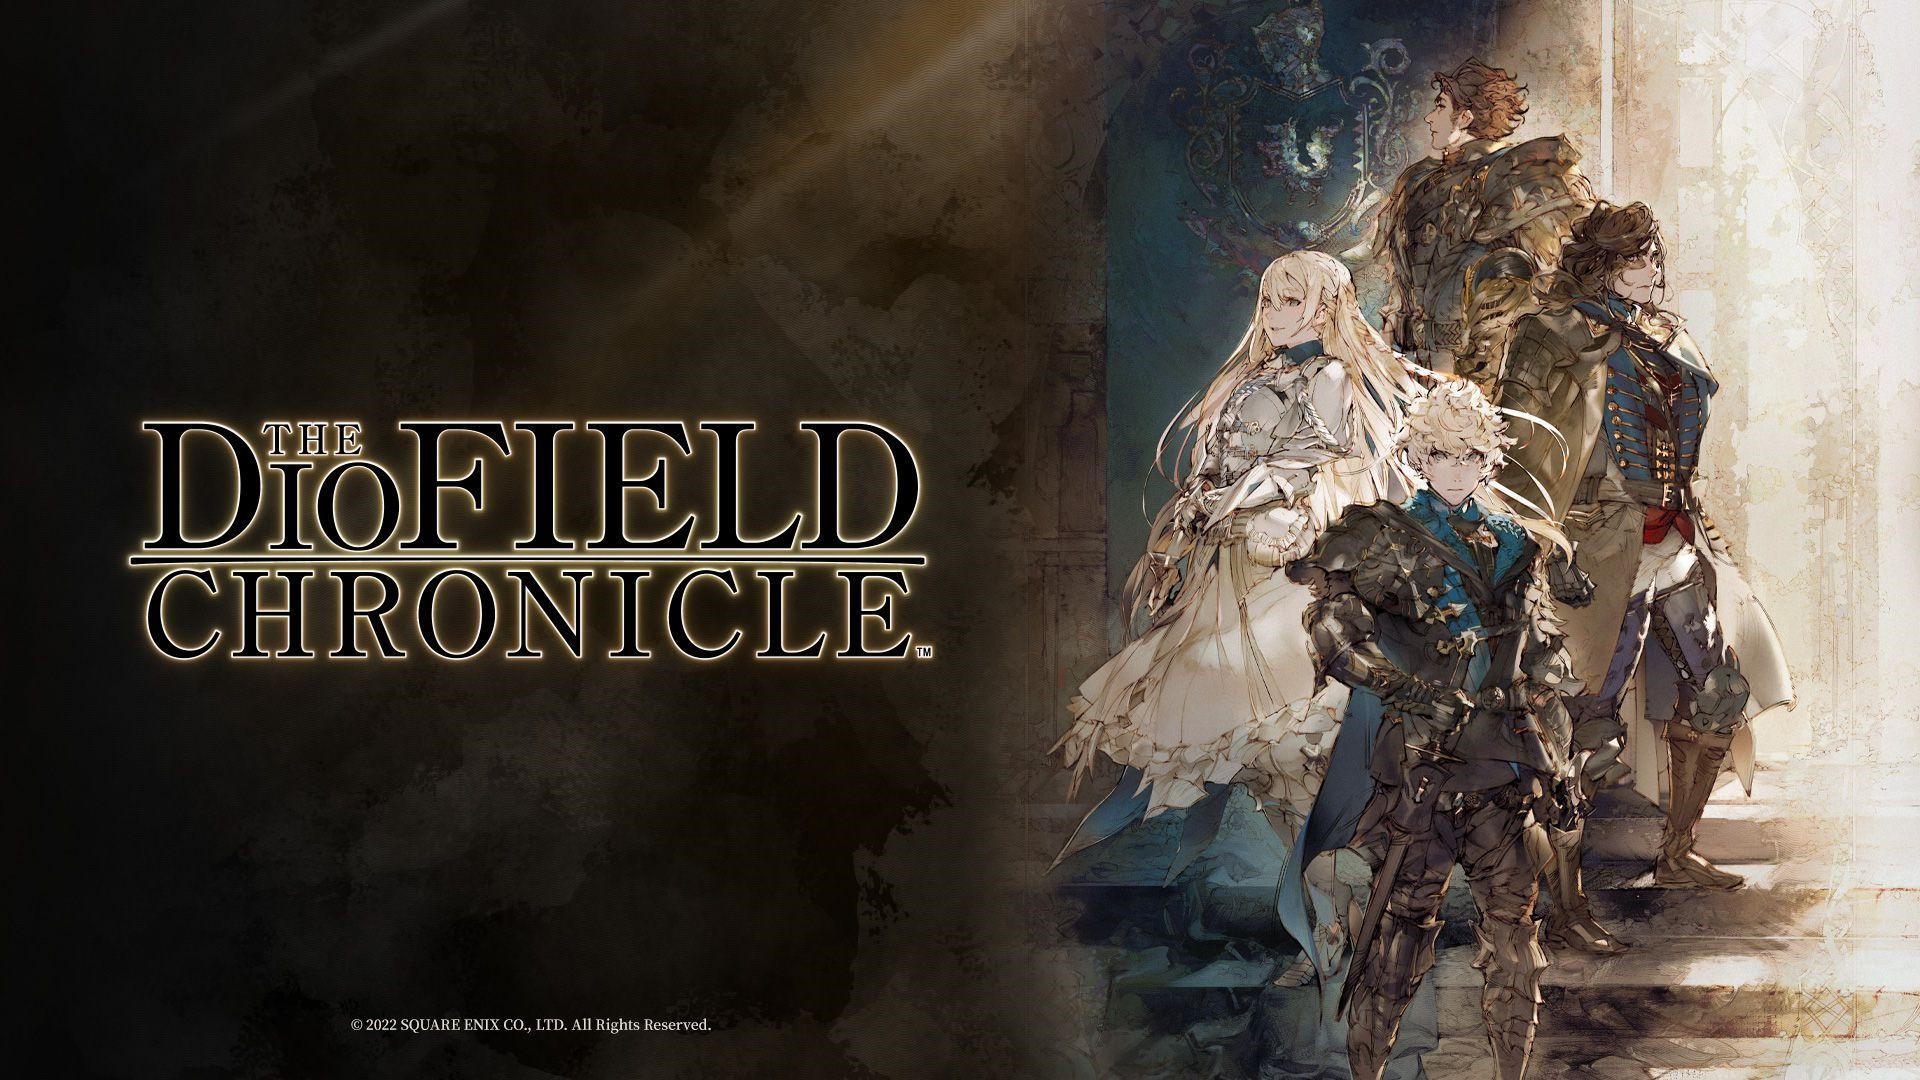 The DioField Chronicle – Update 1.20 is Live, Adds New Story
and Extra Mode